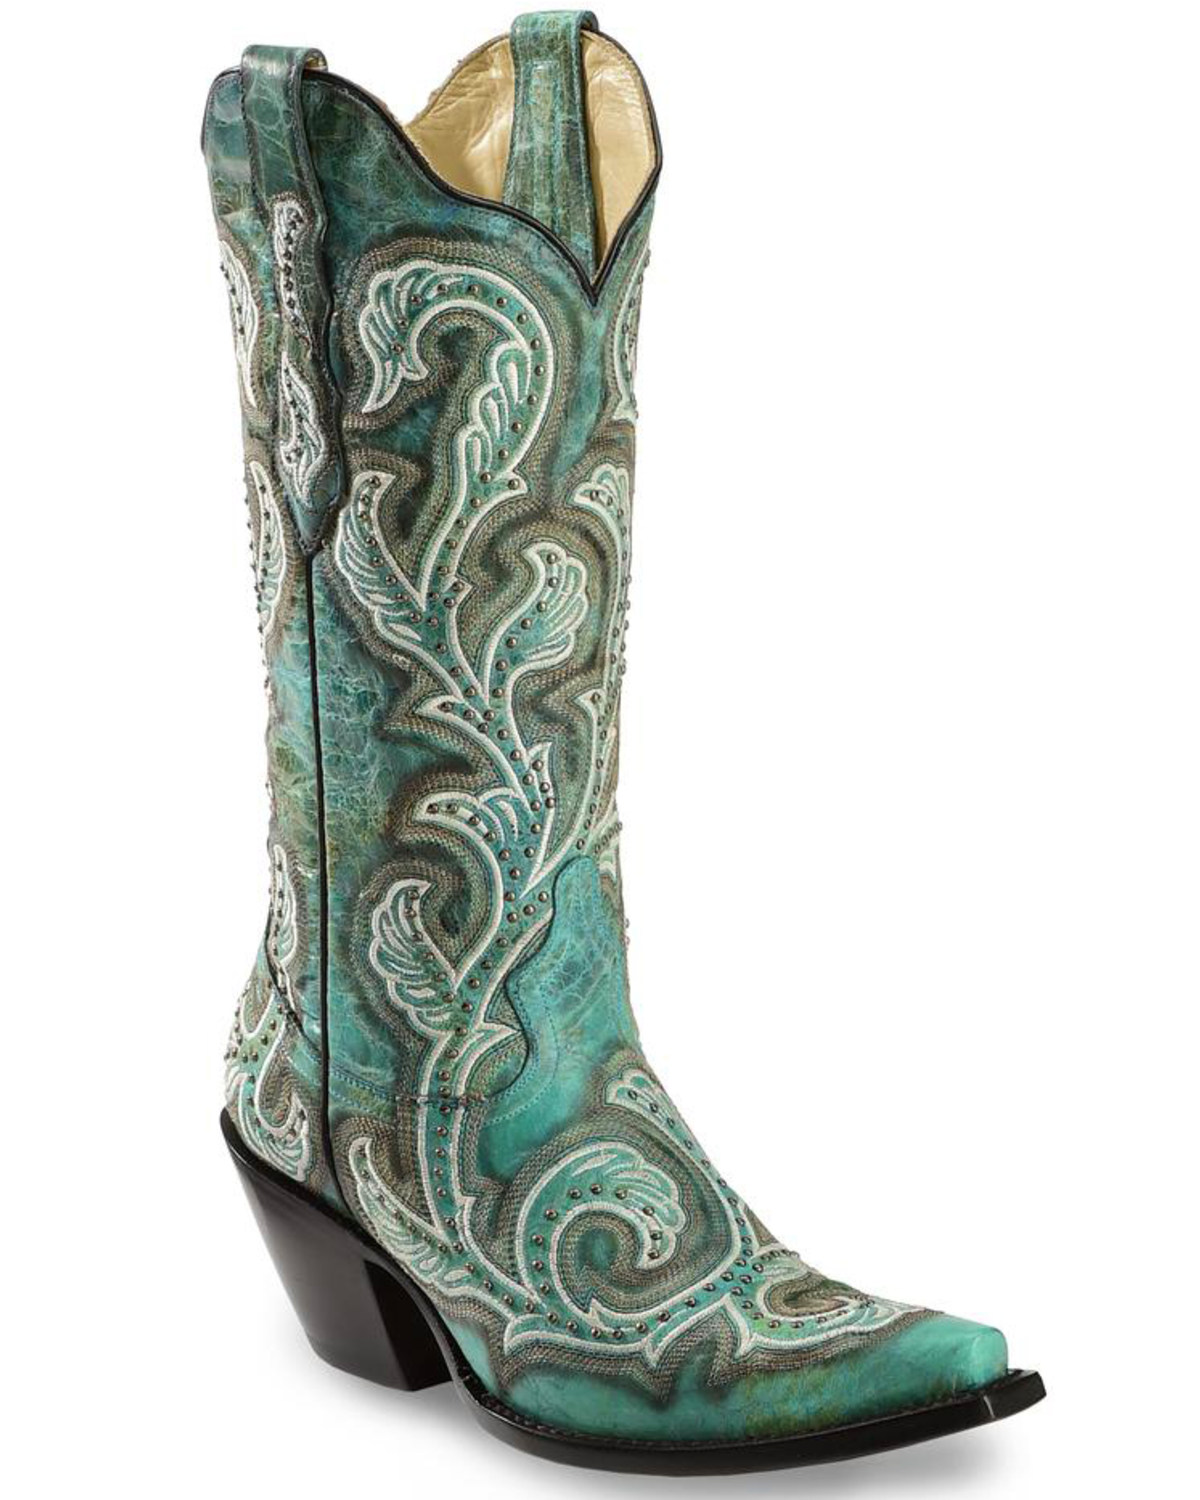 corral women's boots turquoise